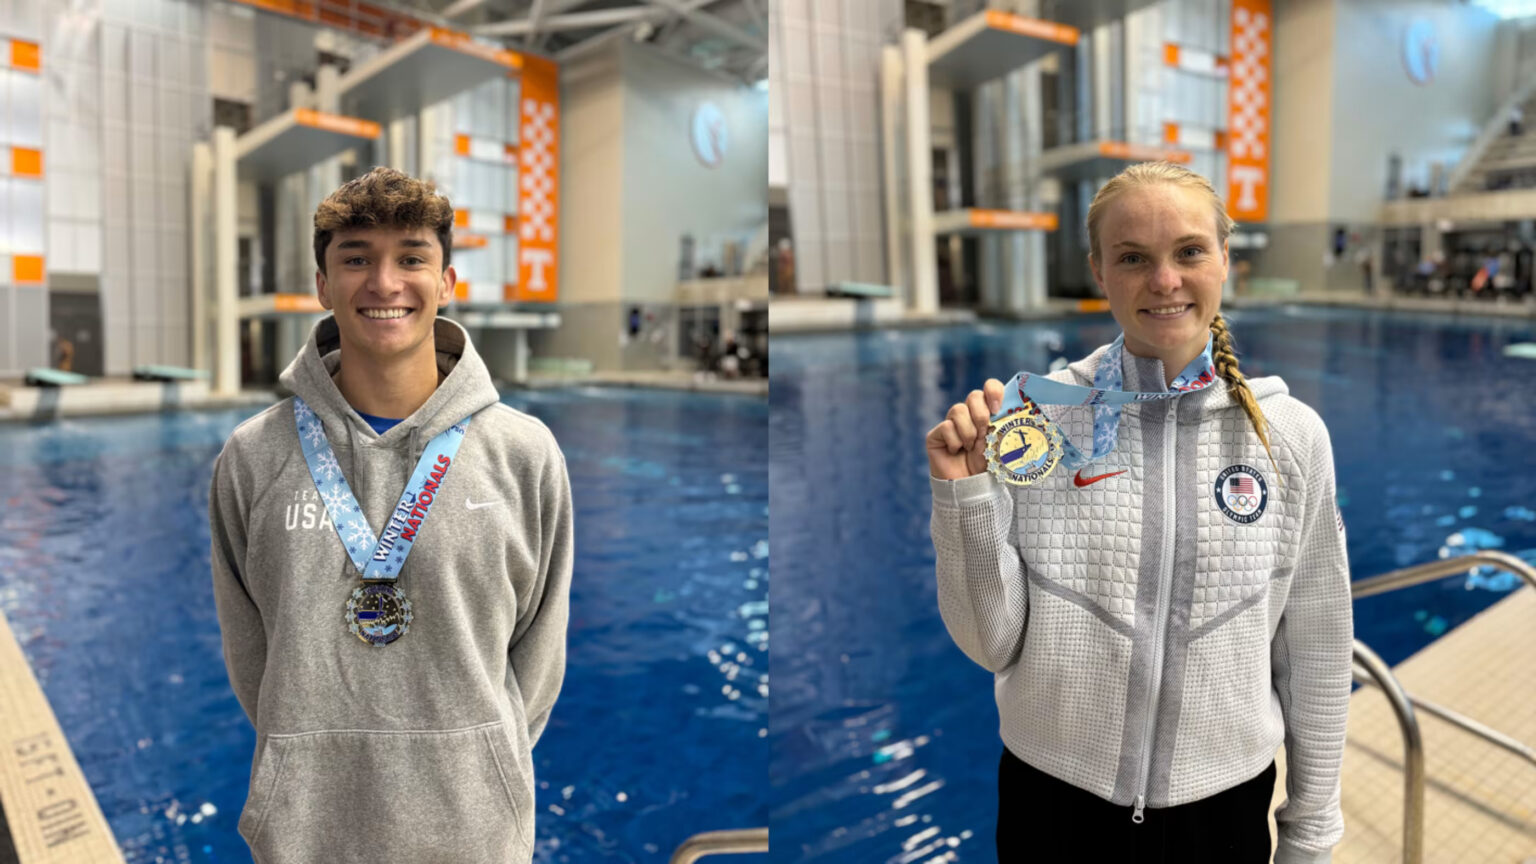 Downs Wins Men's 3Meter, Schnell Tops Women's 10Meter At USA Diving